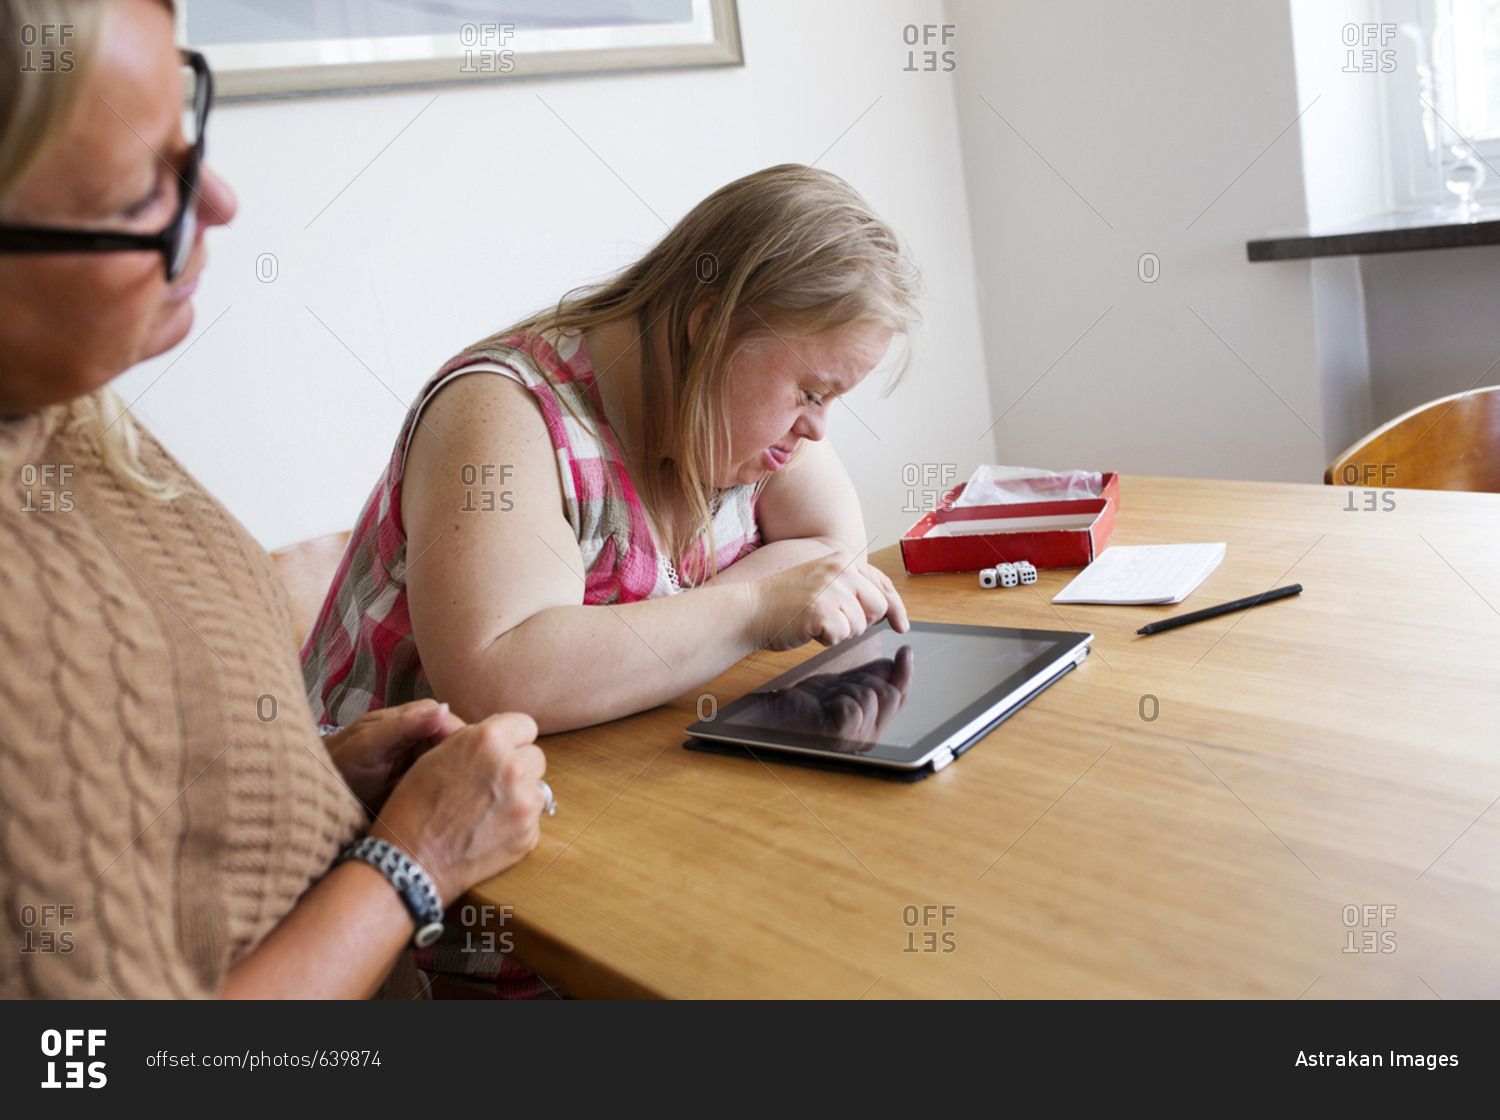 Daughter with Down syndrome using digital tablet, mother looking